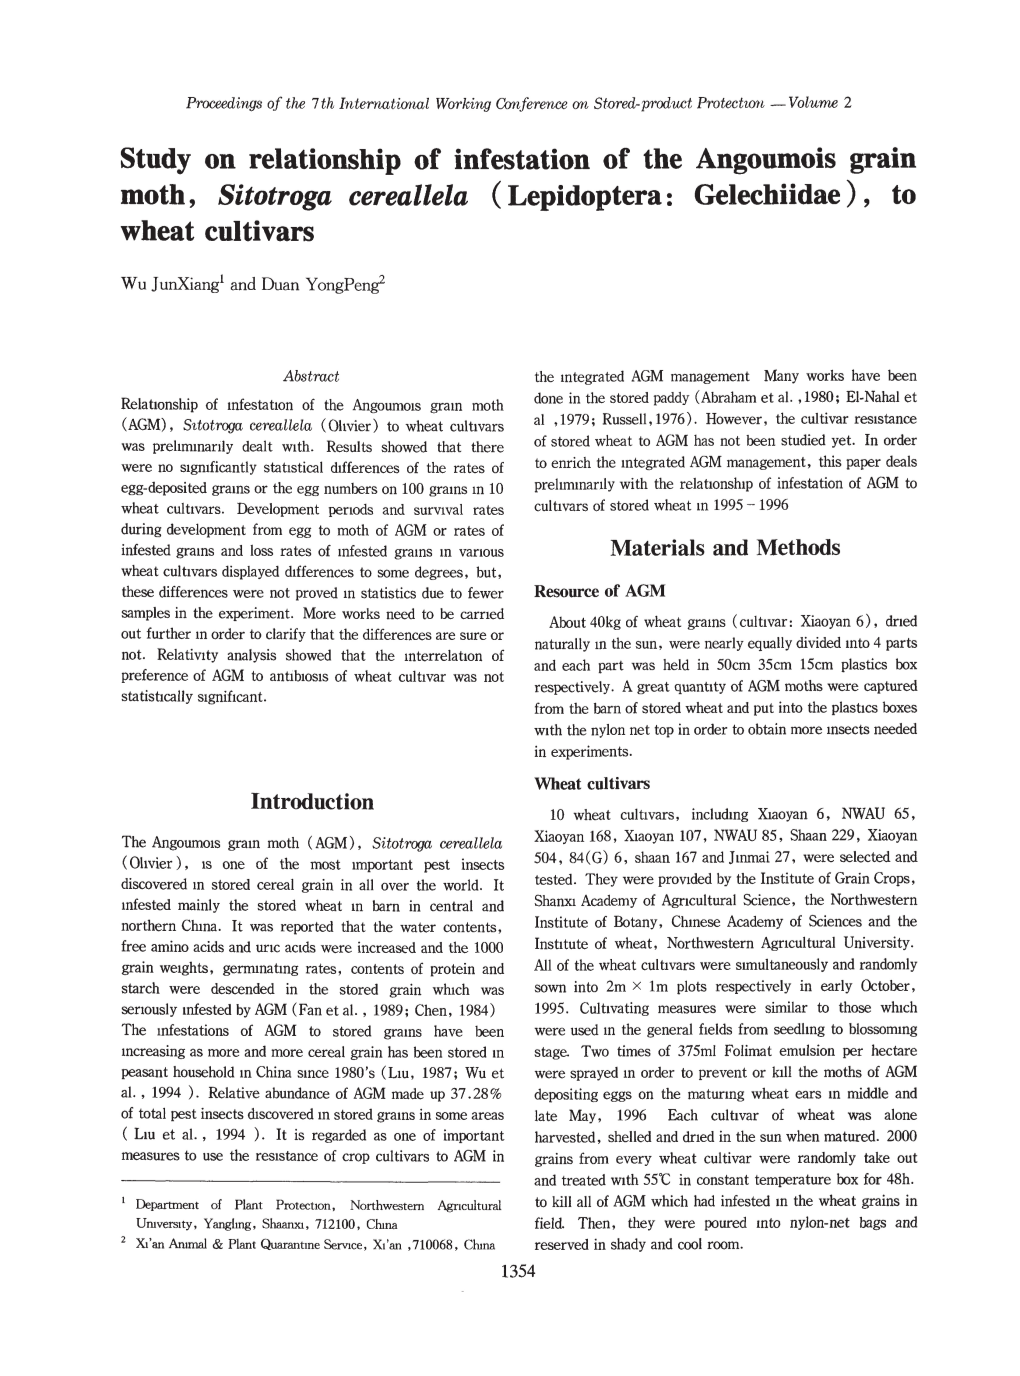 Study on Relationship of Infestation of the Angoumois Grain Moth, Sitotroga Cereallela (Lepidoptera: Gelechiidae), to Wheat Cultivars